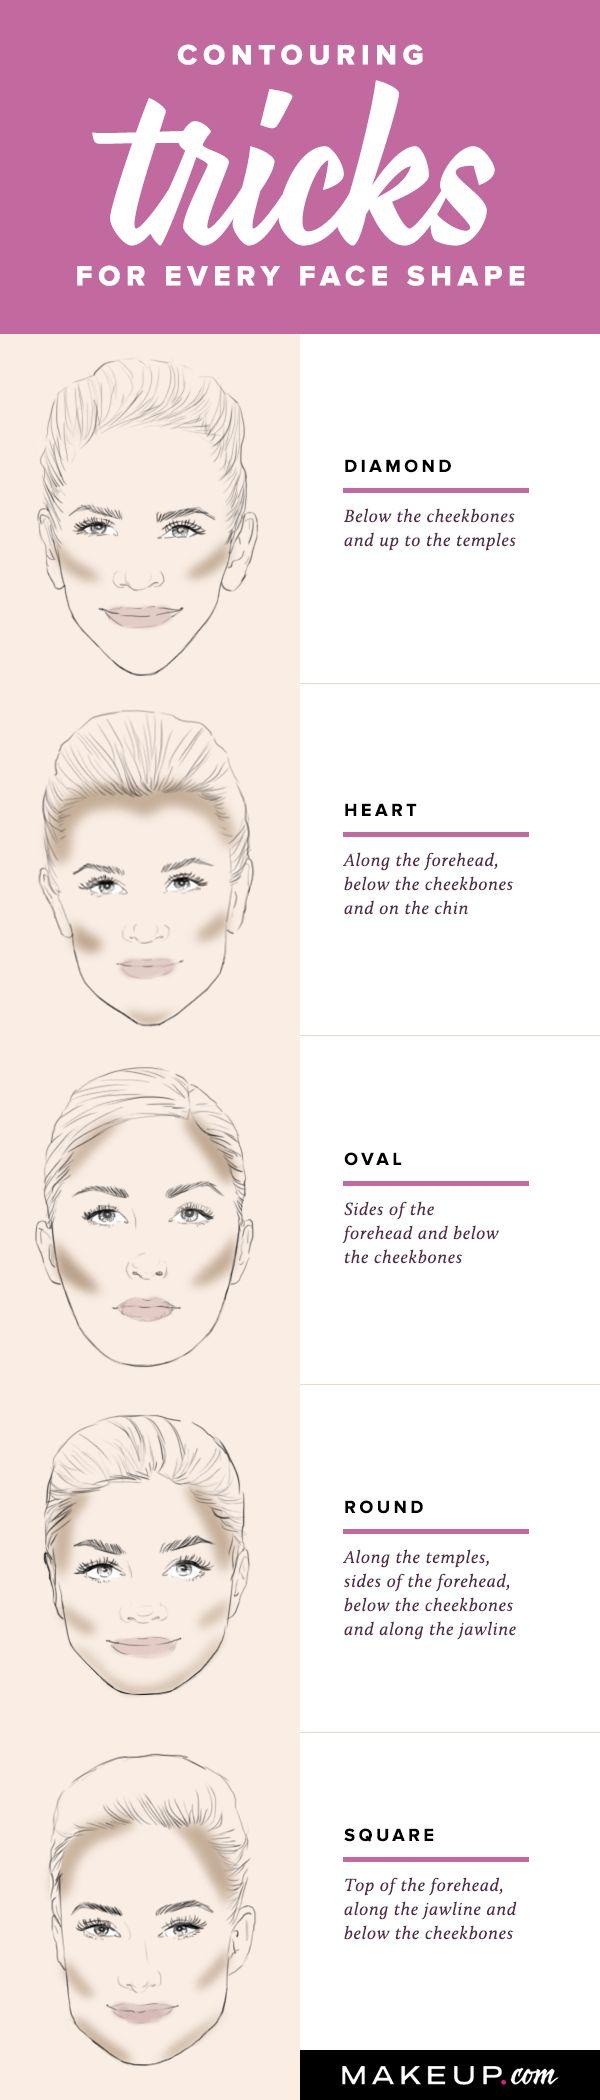 Wedding - How To Contour For Your Face Shape